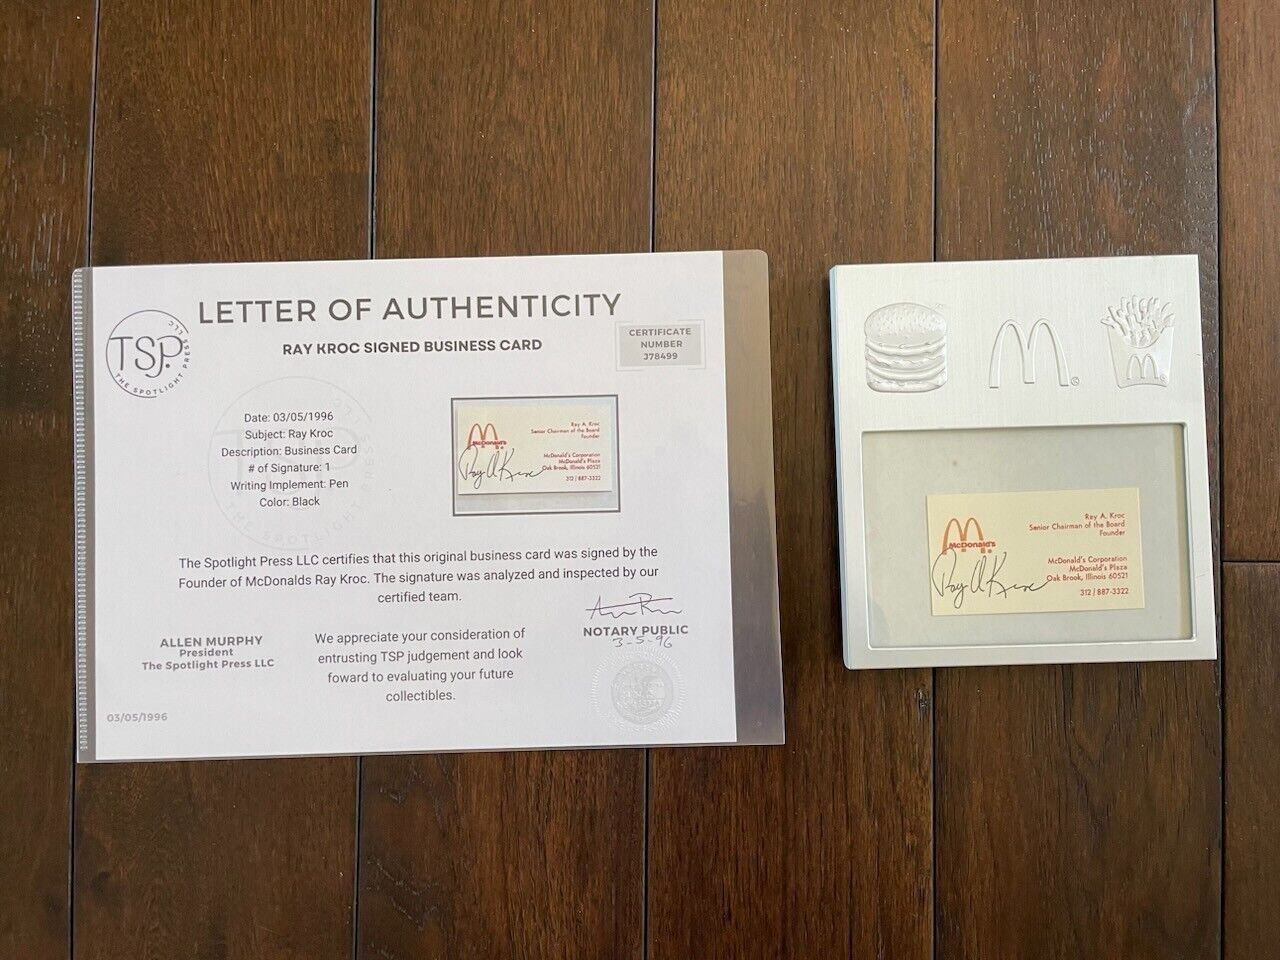 McDonalds Ray Kroc Signed Business Card